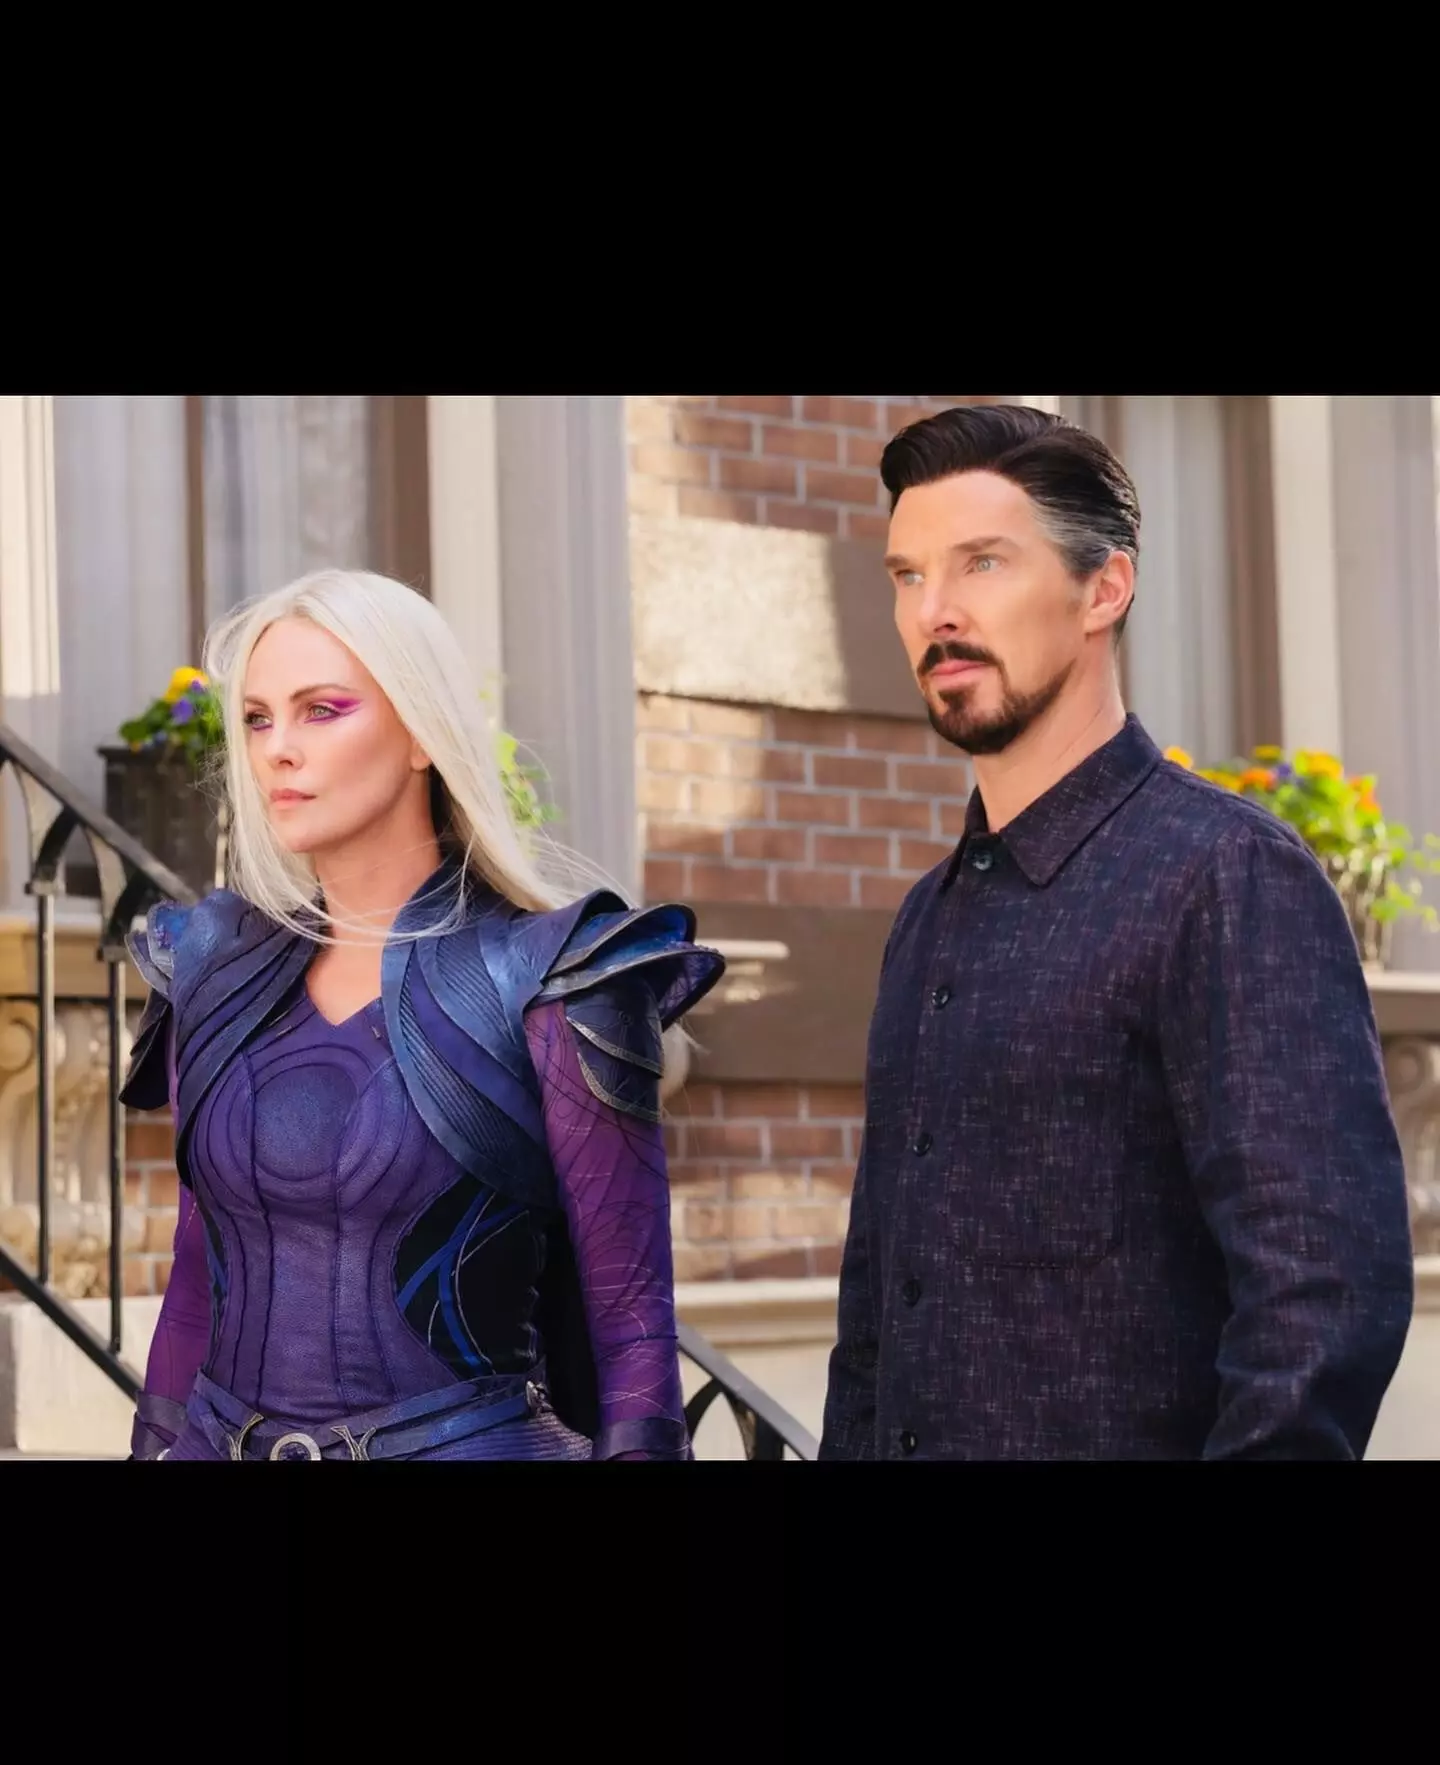 Charlize Theron introduces her MCU character Clea on Instagram